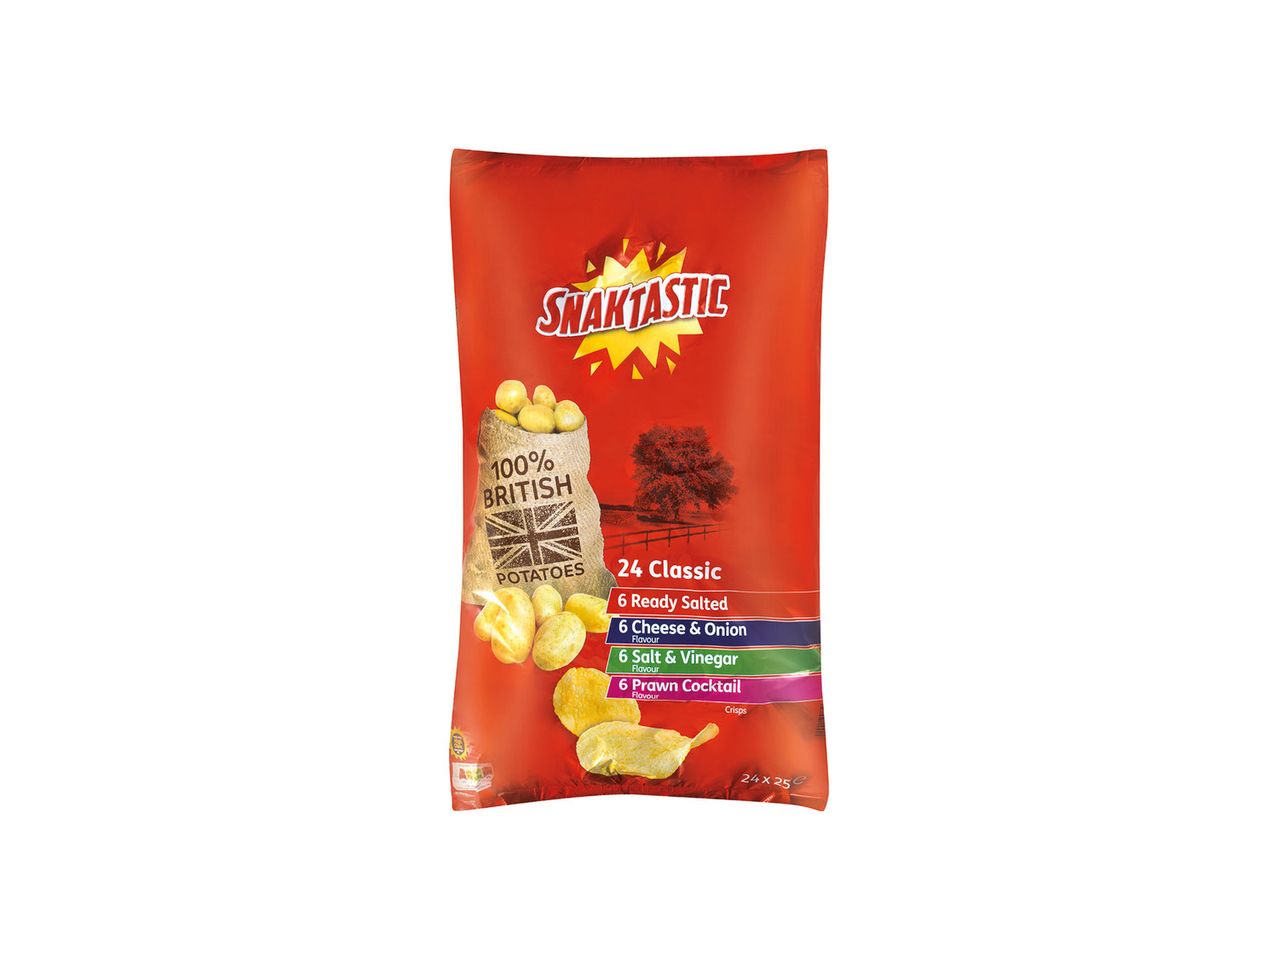 Go to full screen view: Snaktastic Classic Crisps multipack - Image 1